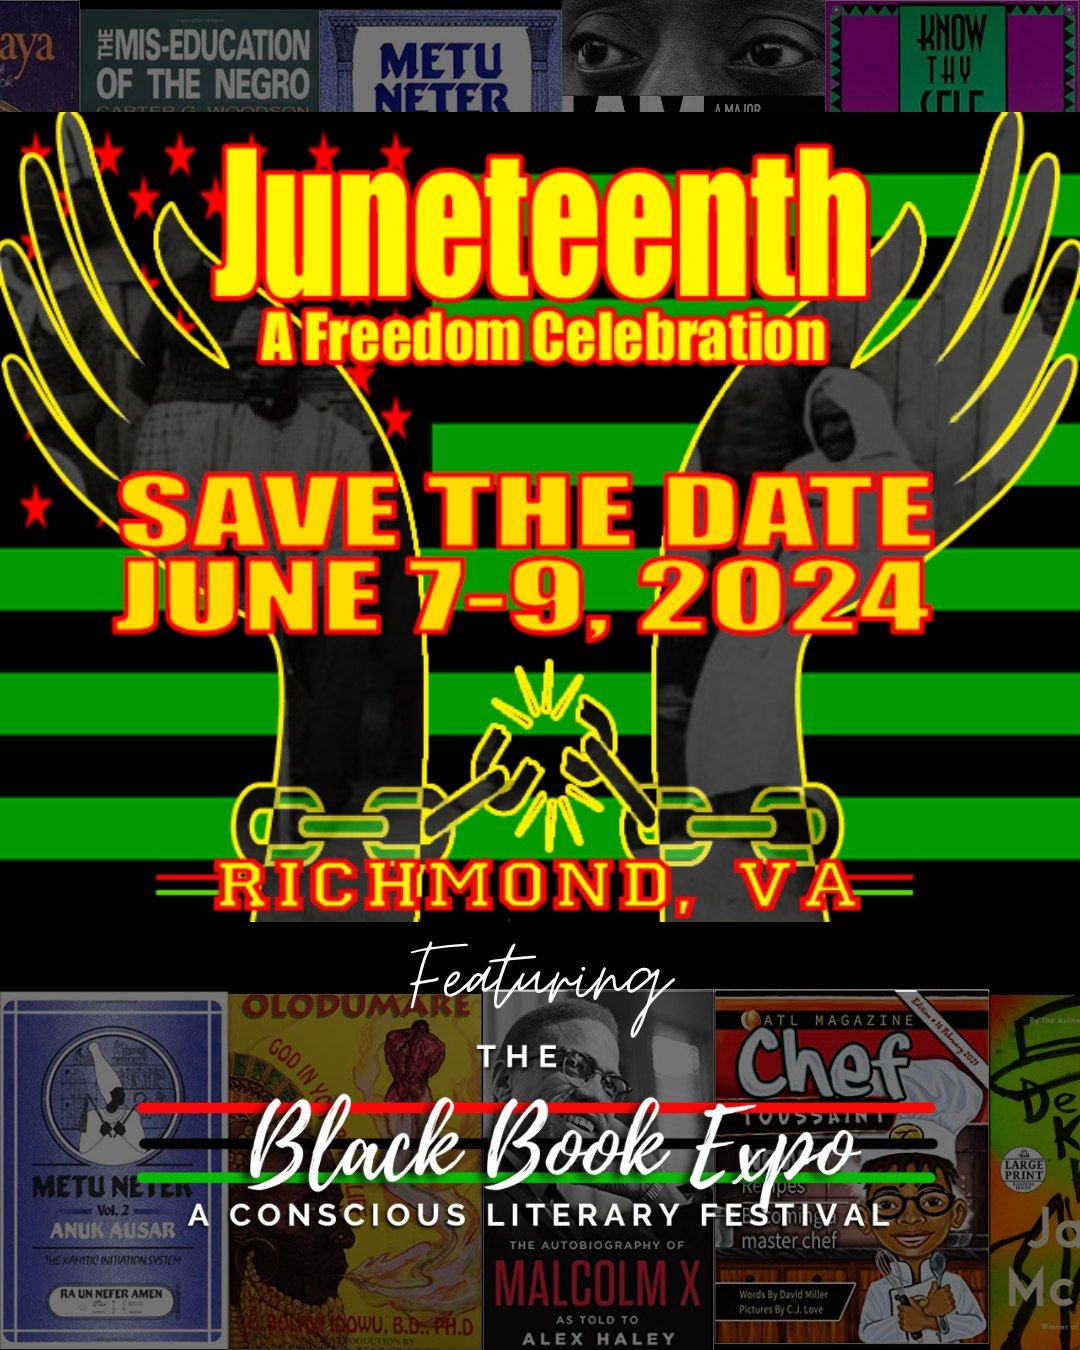 Juneteenth 2024, A Freedom Celebration - Featuring The Black Book Expo